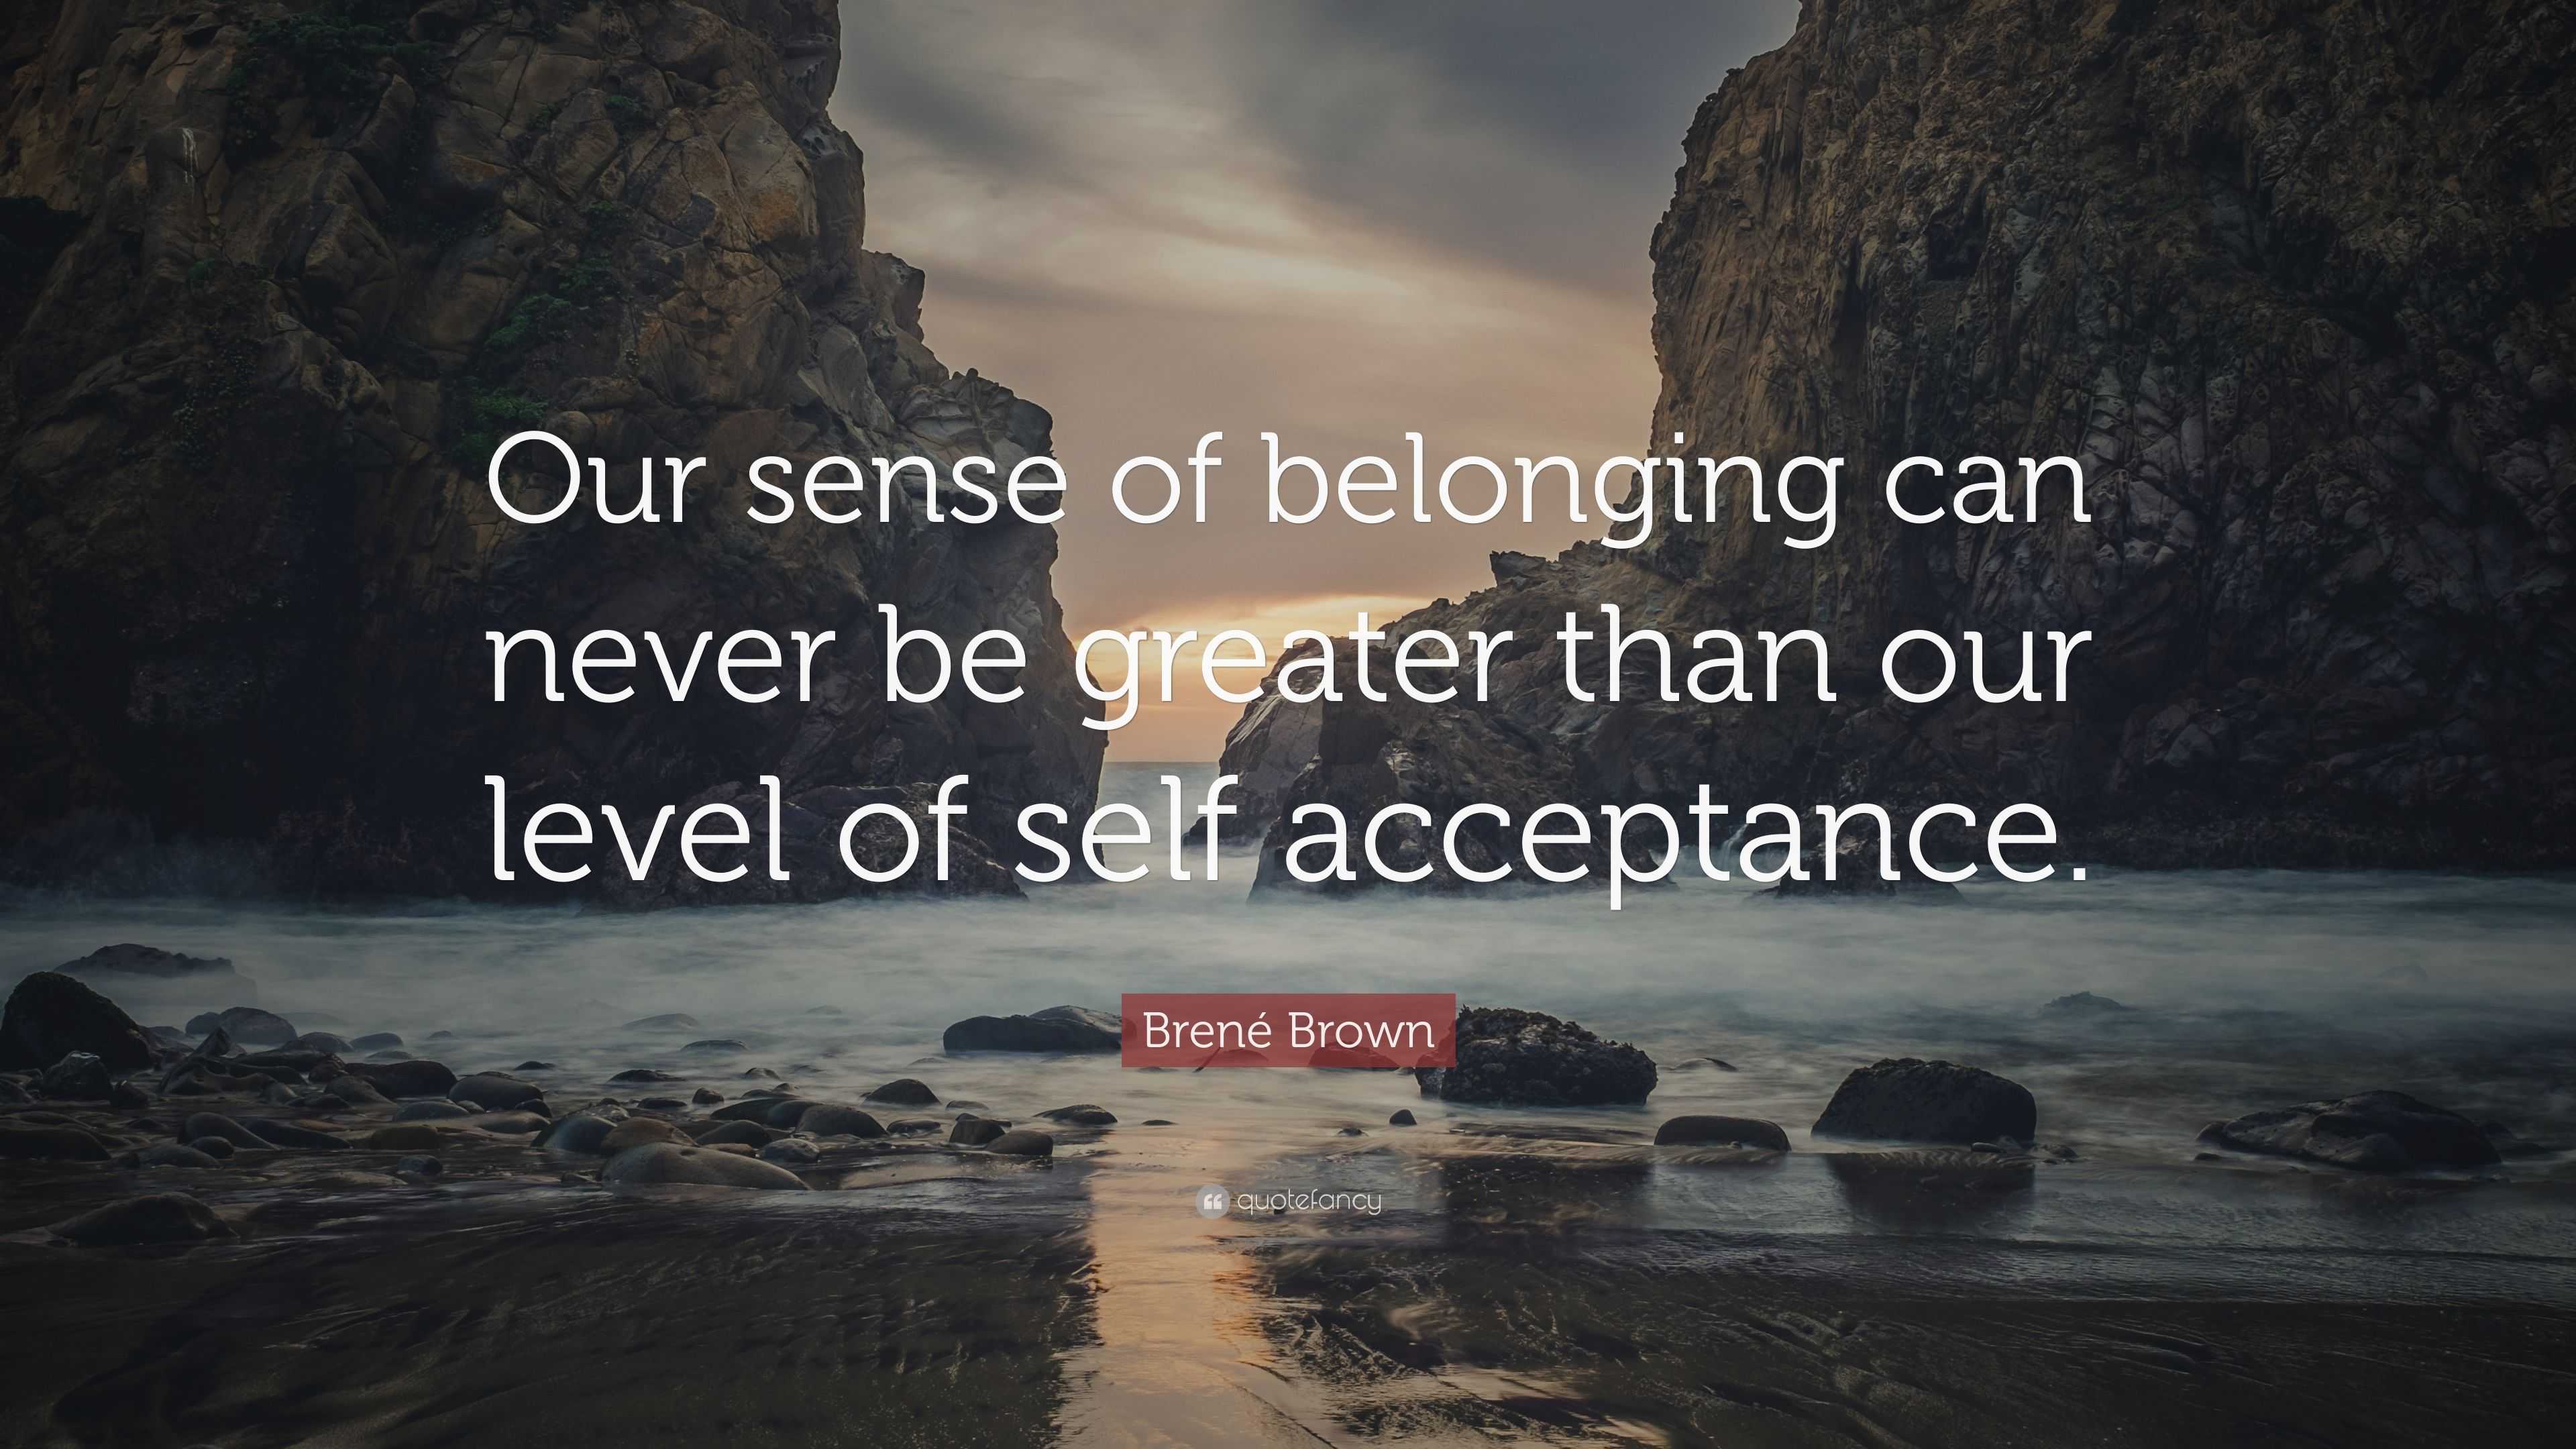 Brené Brown Quote: “Our sense of belonging can never be greater than ...